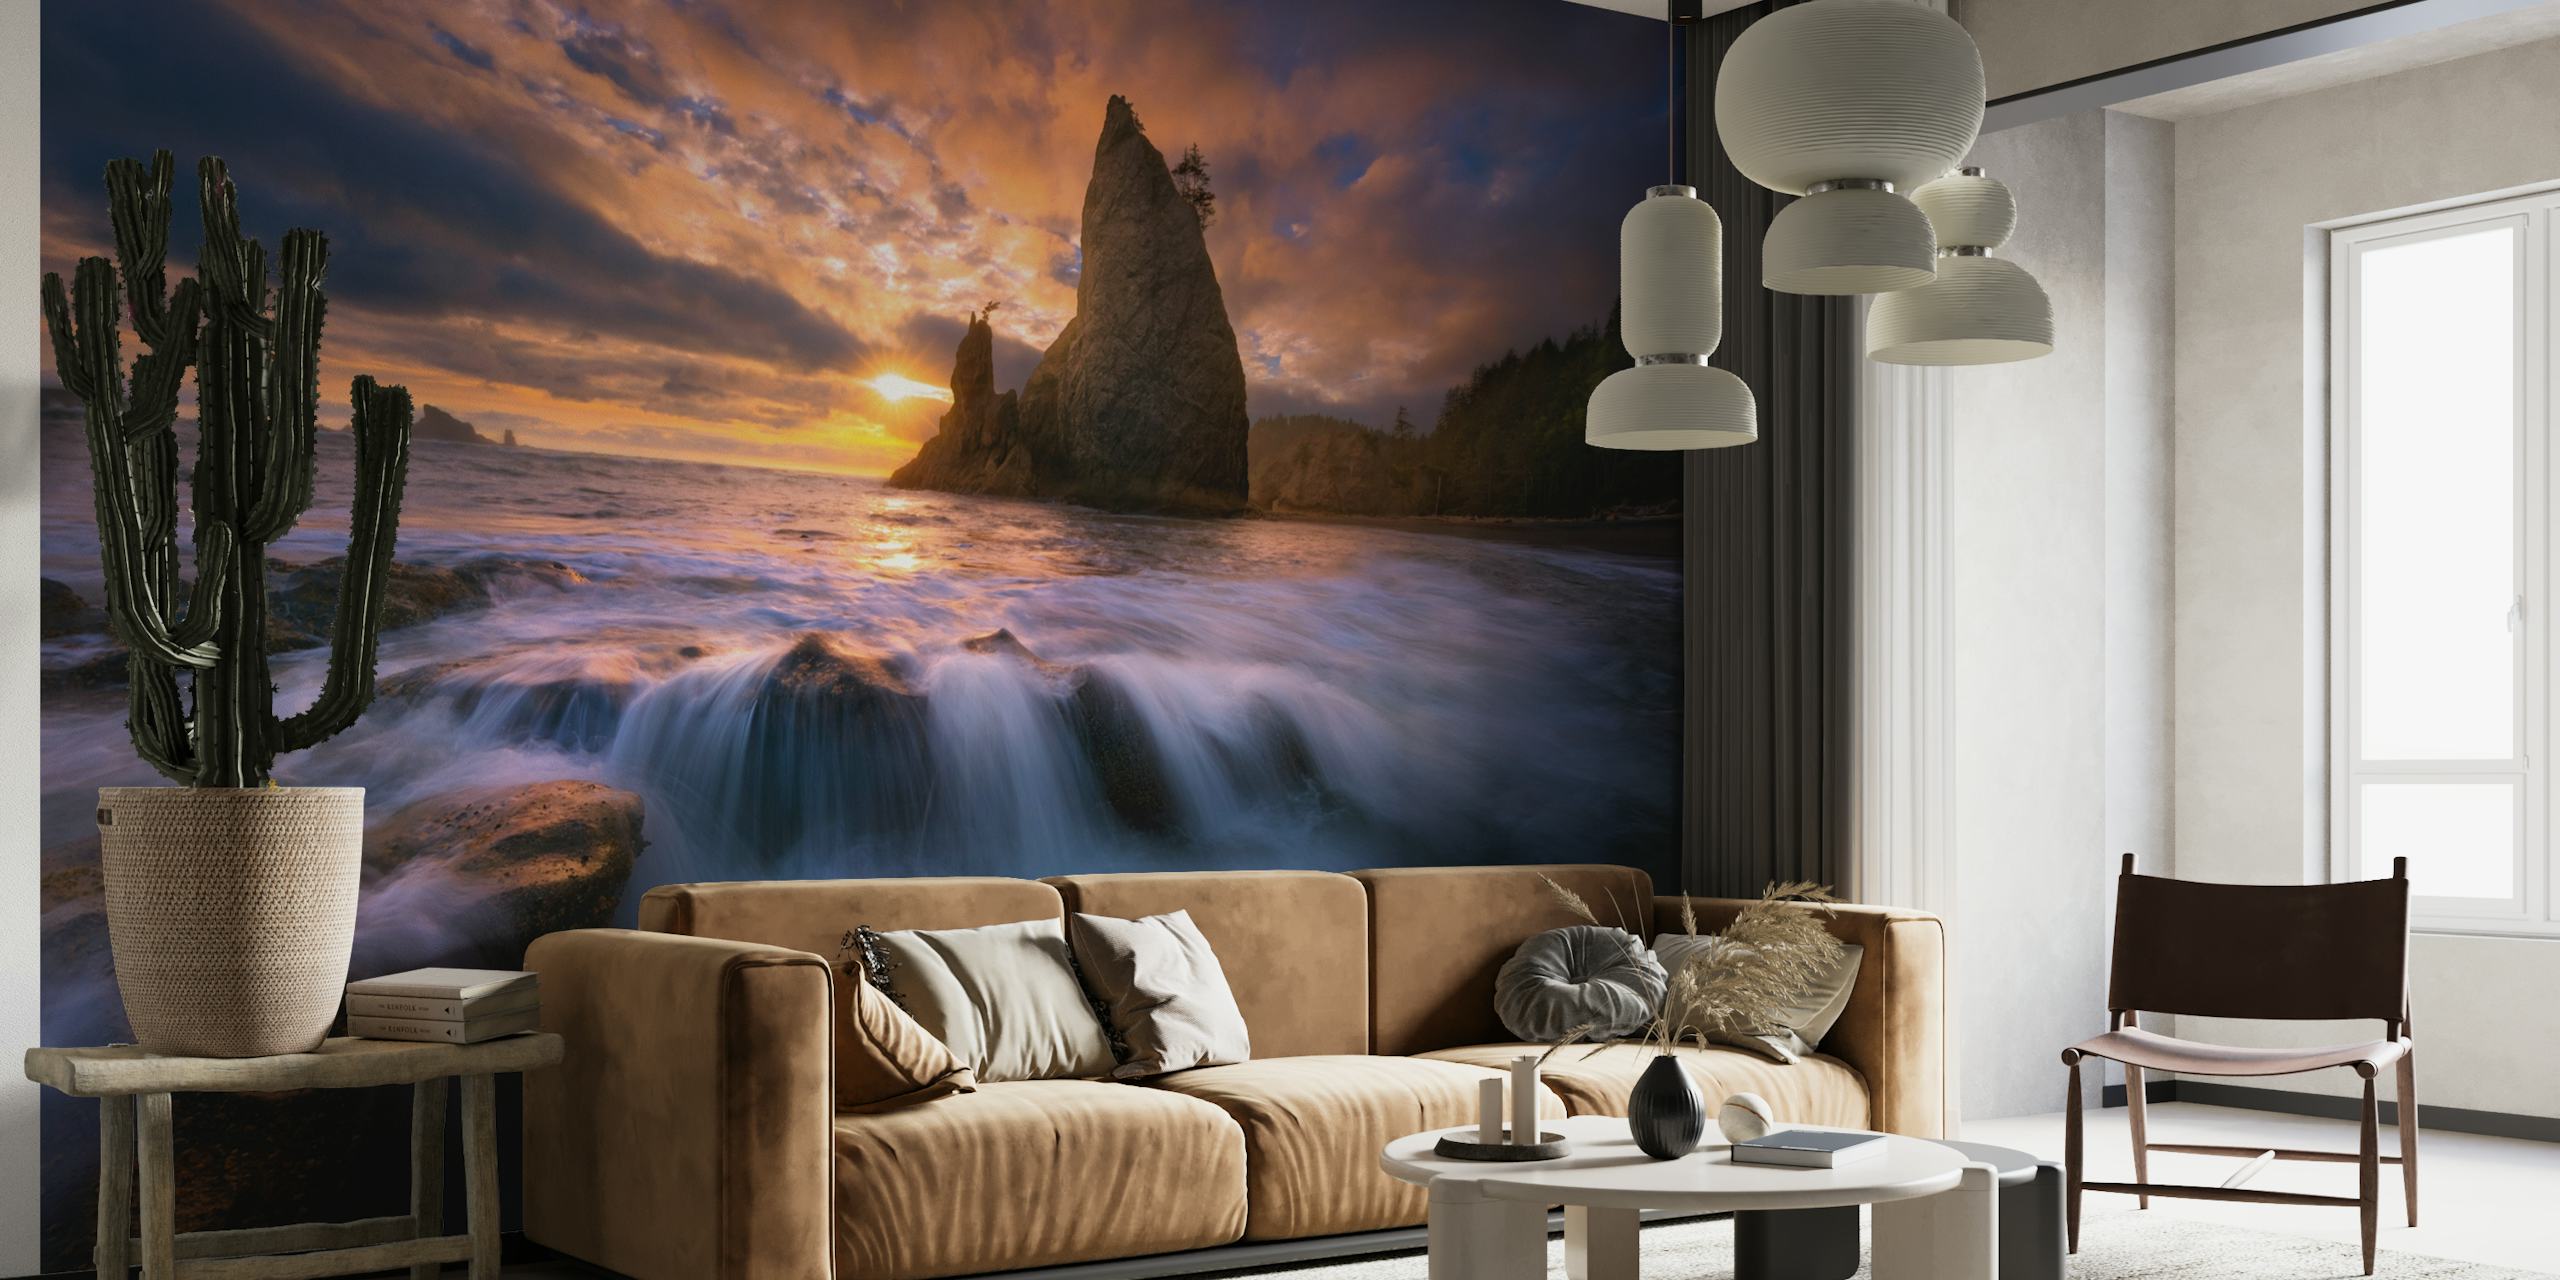 Sunrise seascape wall mural with rock formations and flowing water